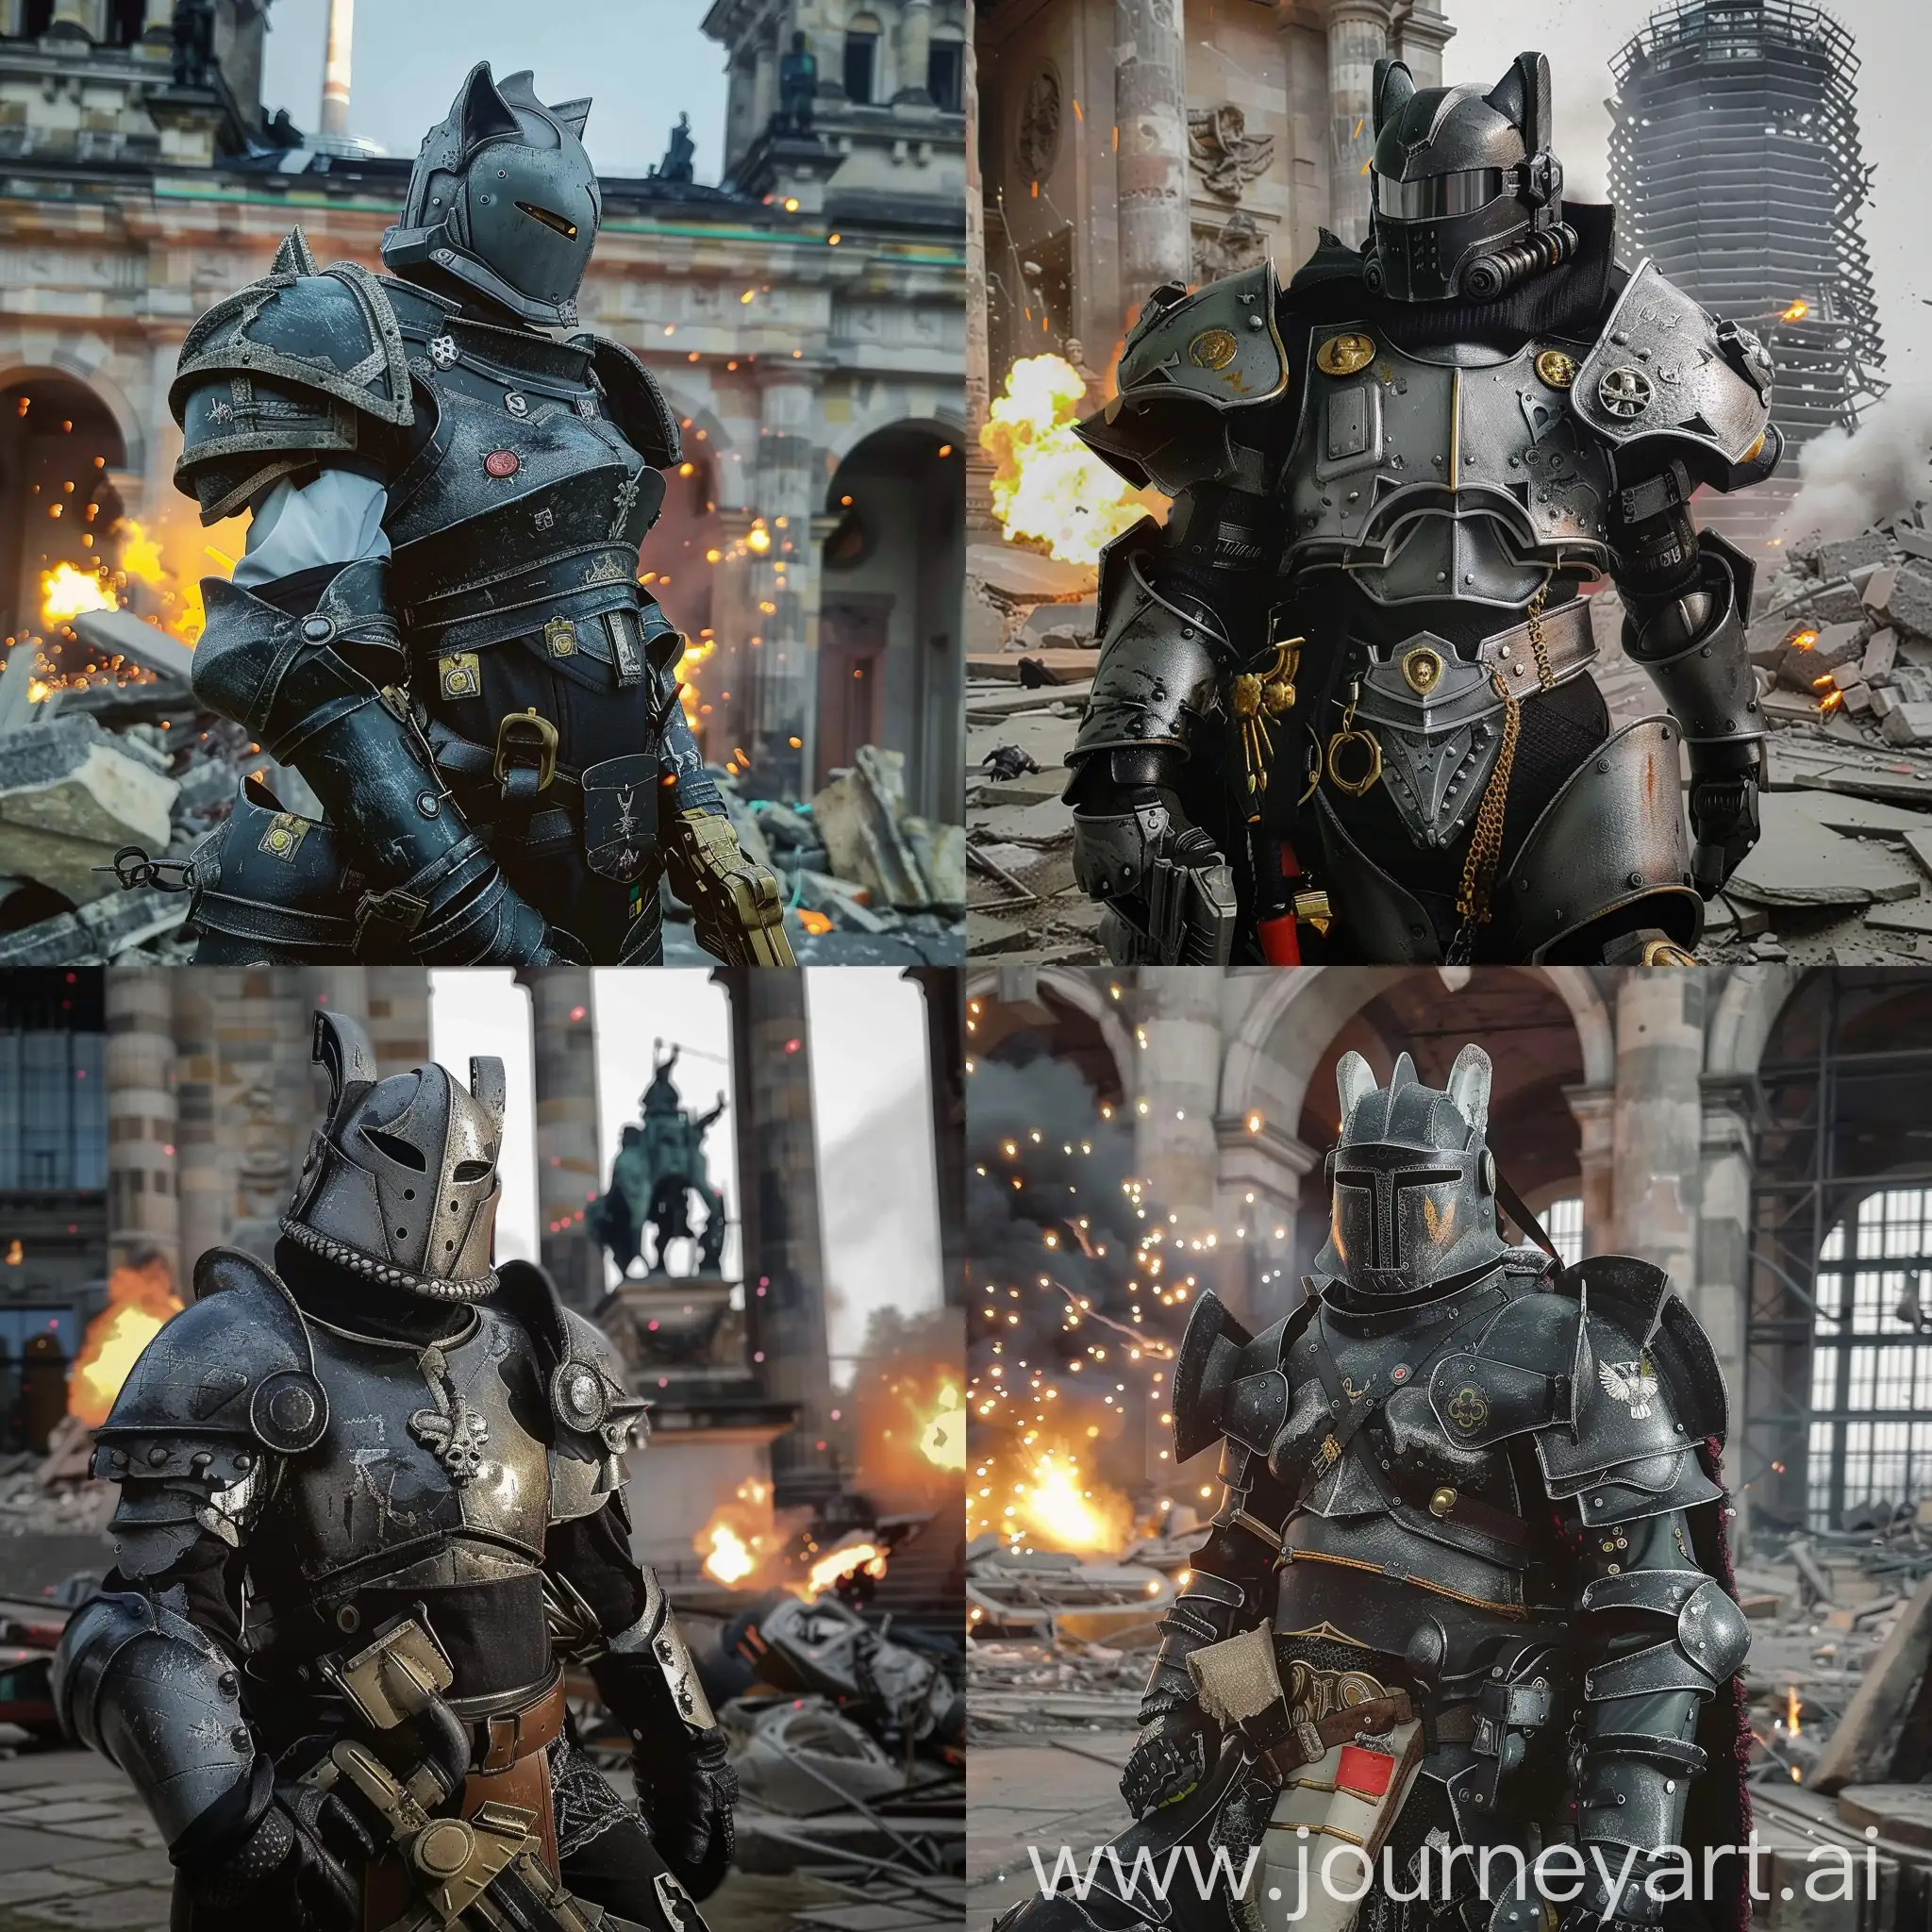 Warrior-in-Stylish-Armor-Amidst-Ruins-and-Explosions